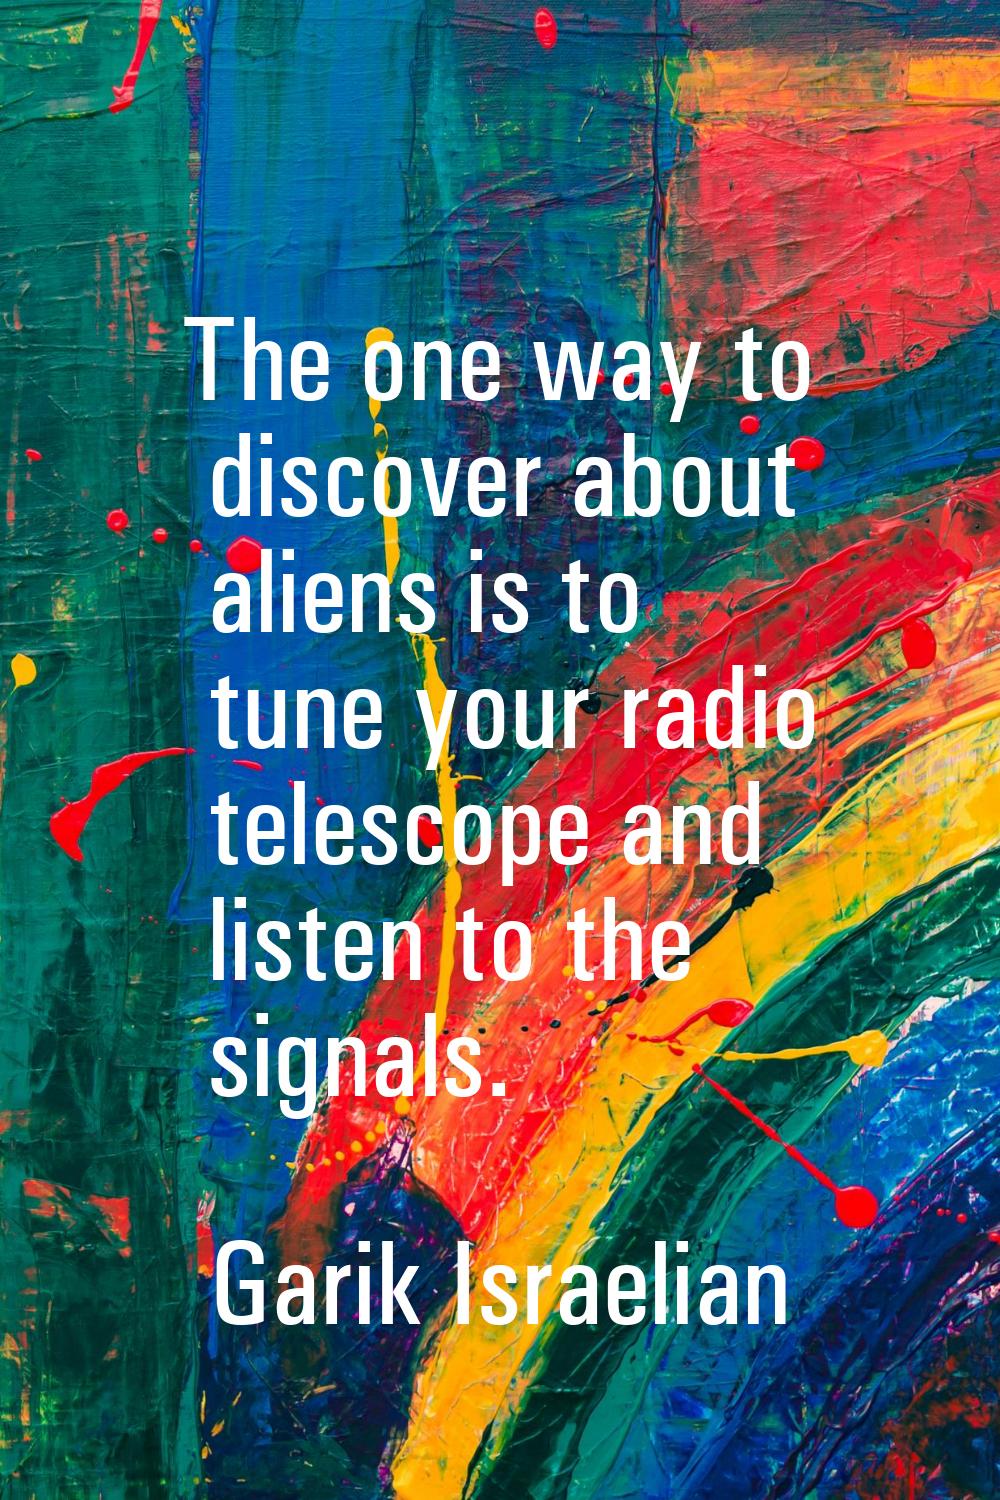 The one way to discover about aliens is to tune your radio telescope and listen to the signals.